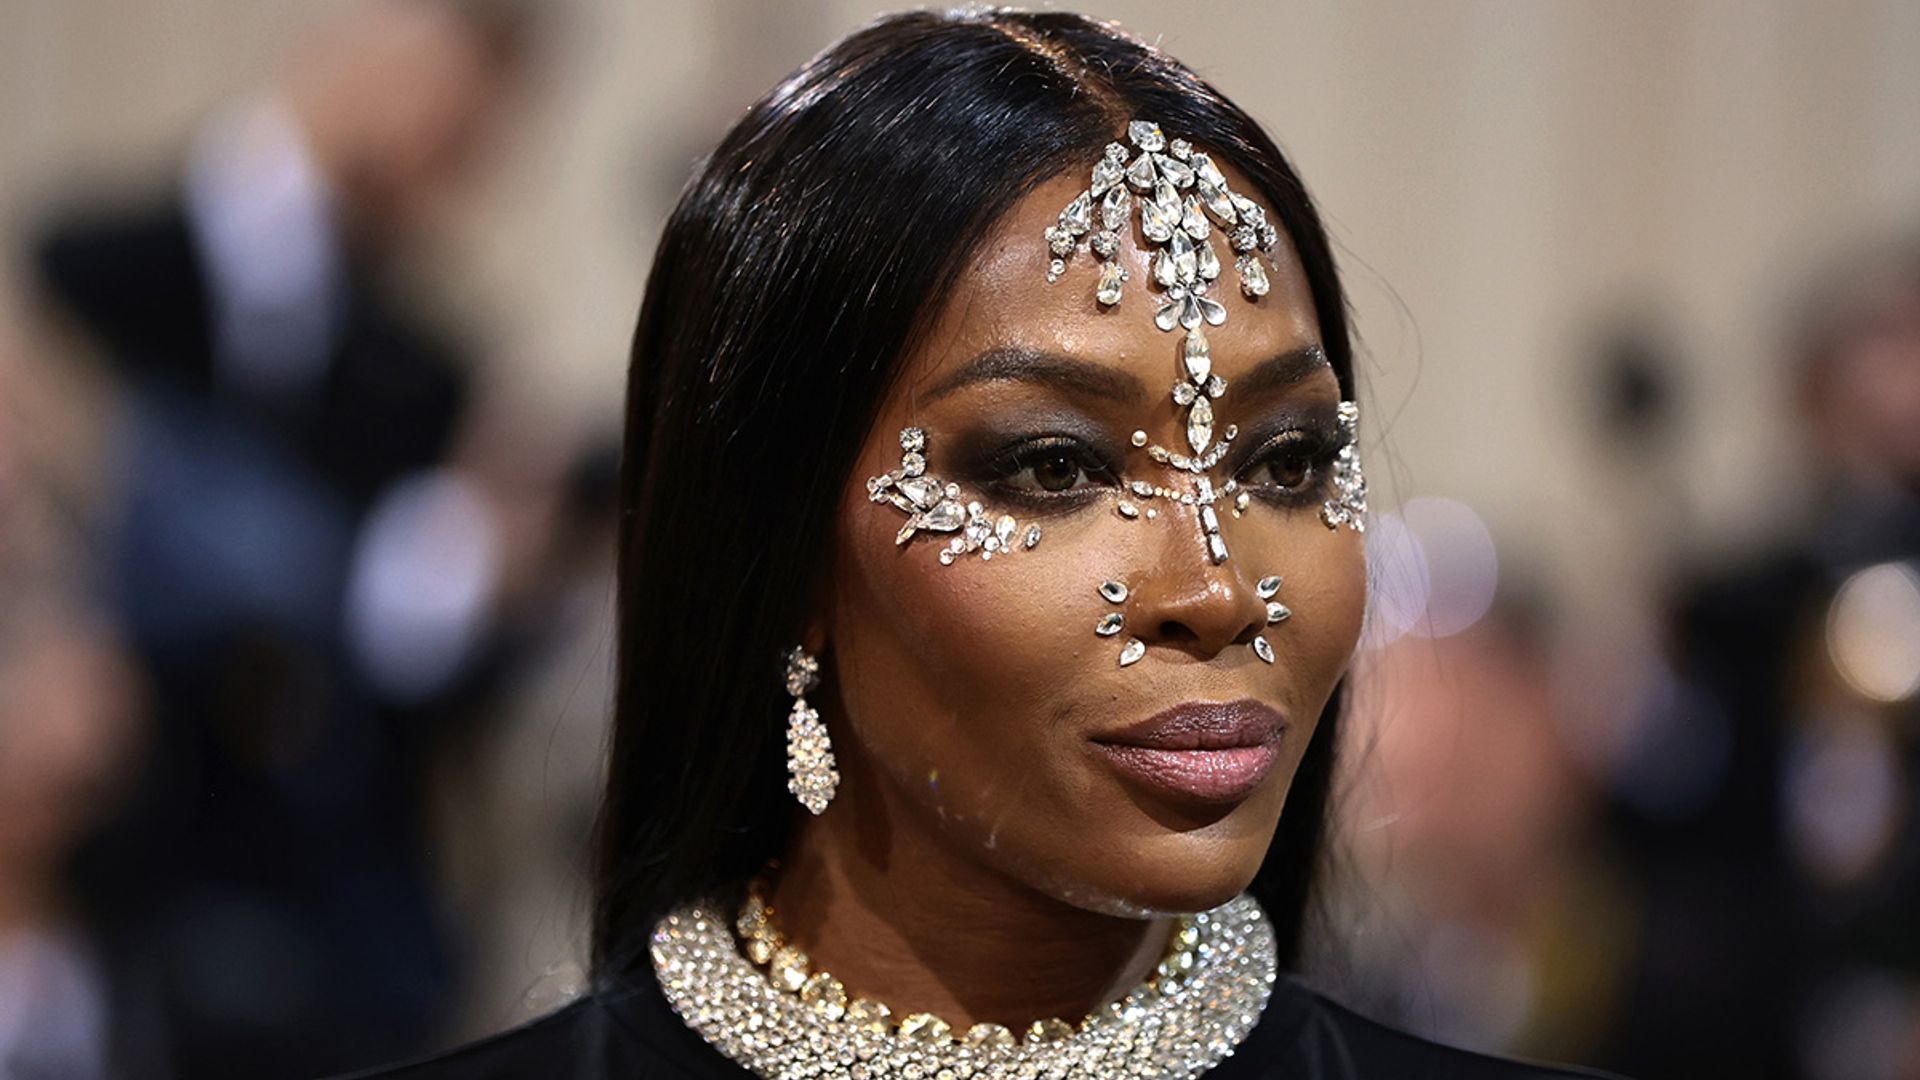 Naomi Campbell shares rare photo of daughter - see special moment